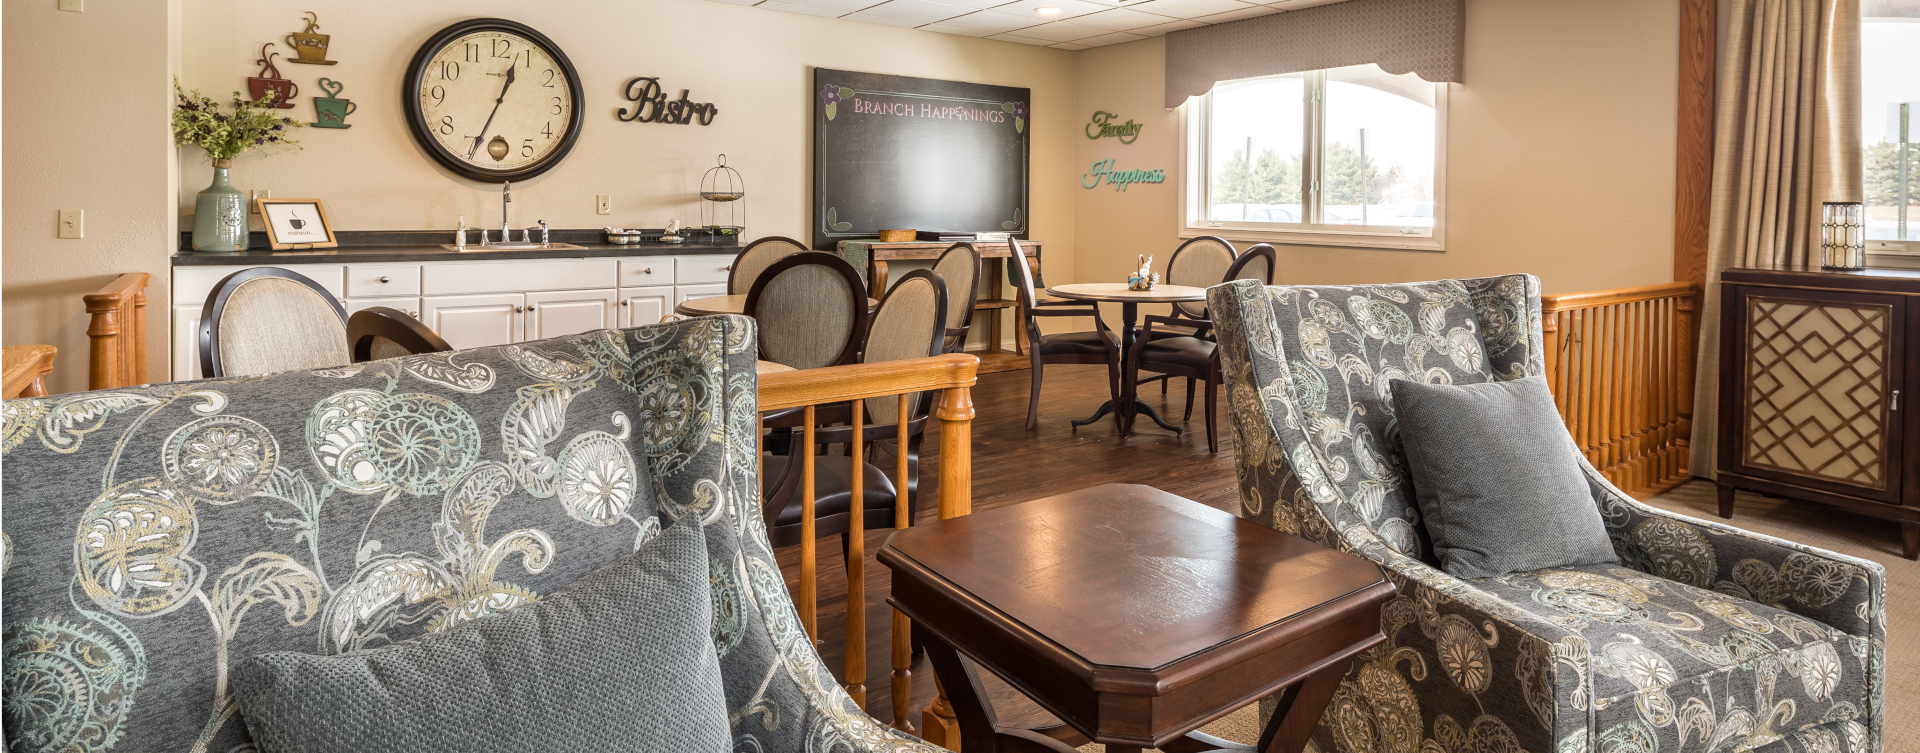 Mingle and converse with old and new friends alike in the bistro at Bickford of West Lansing